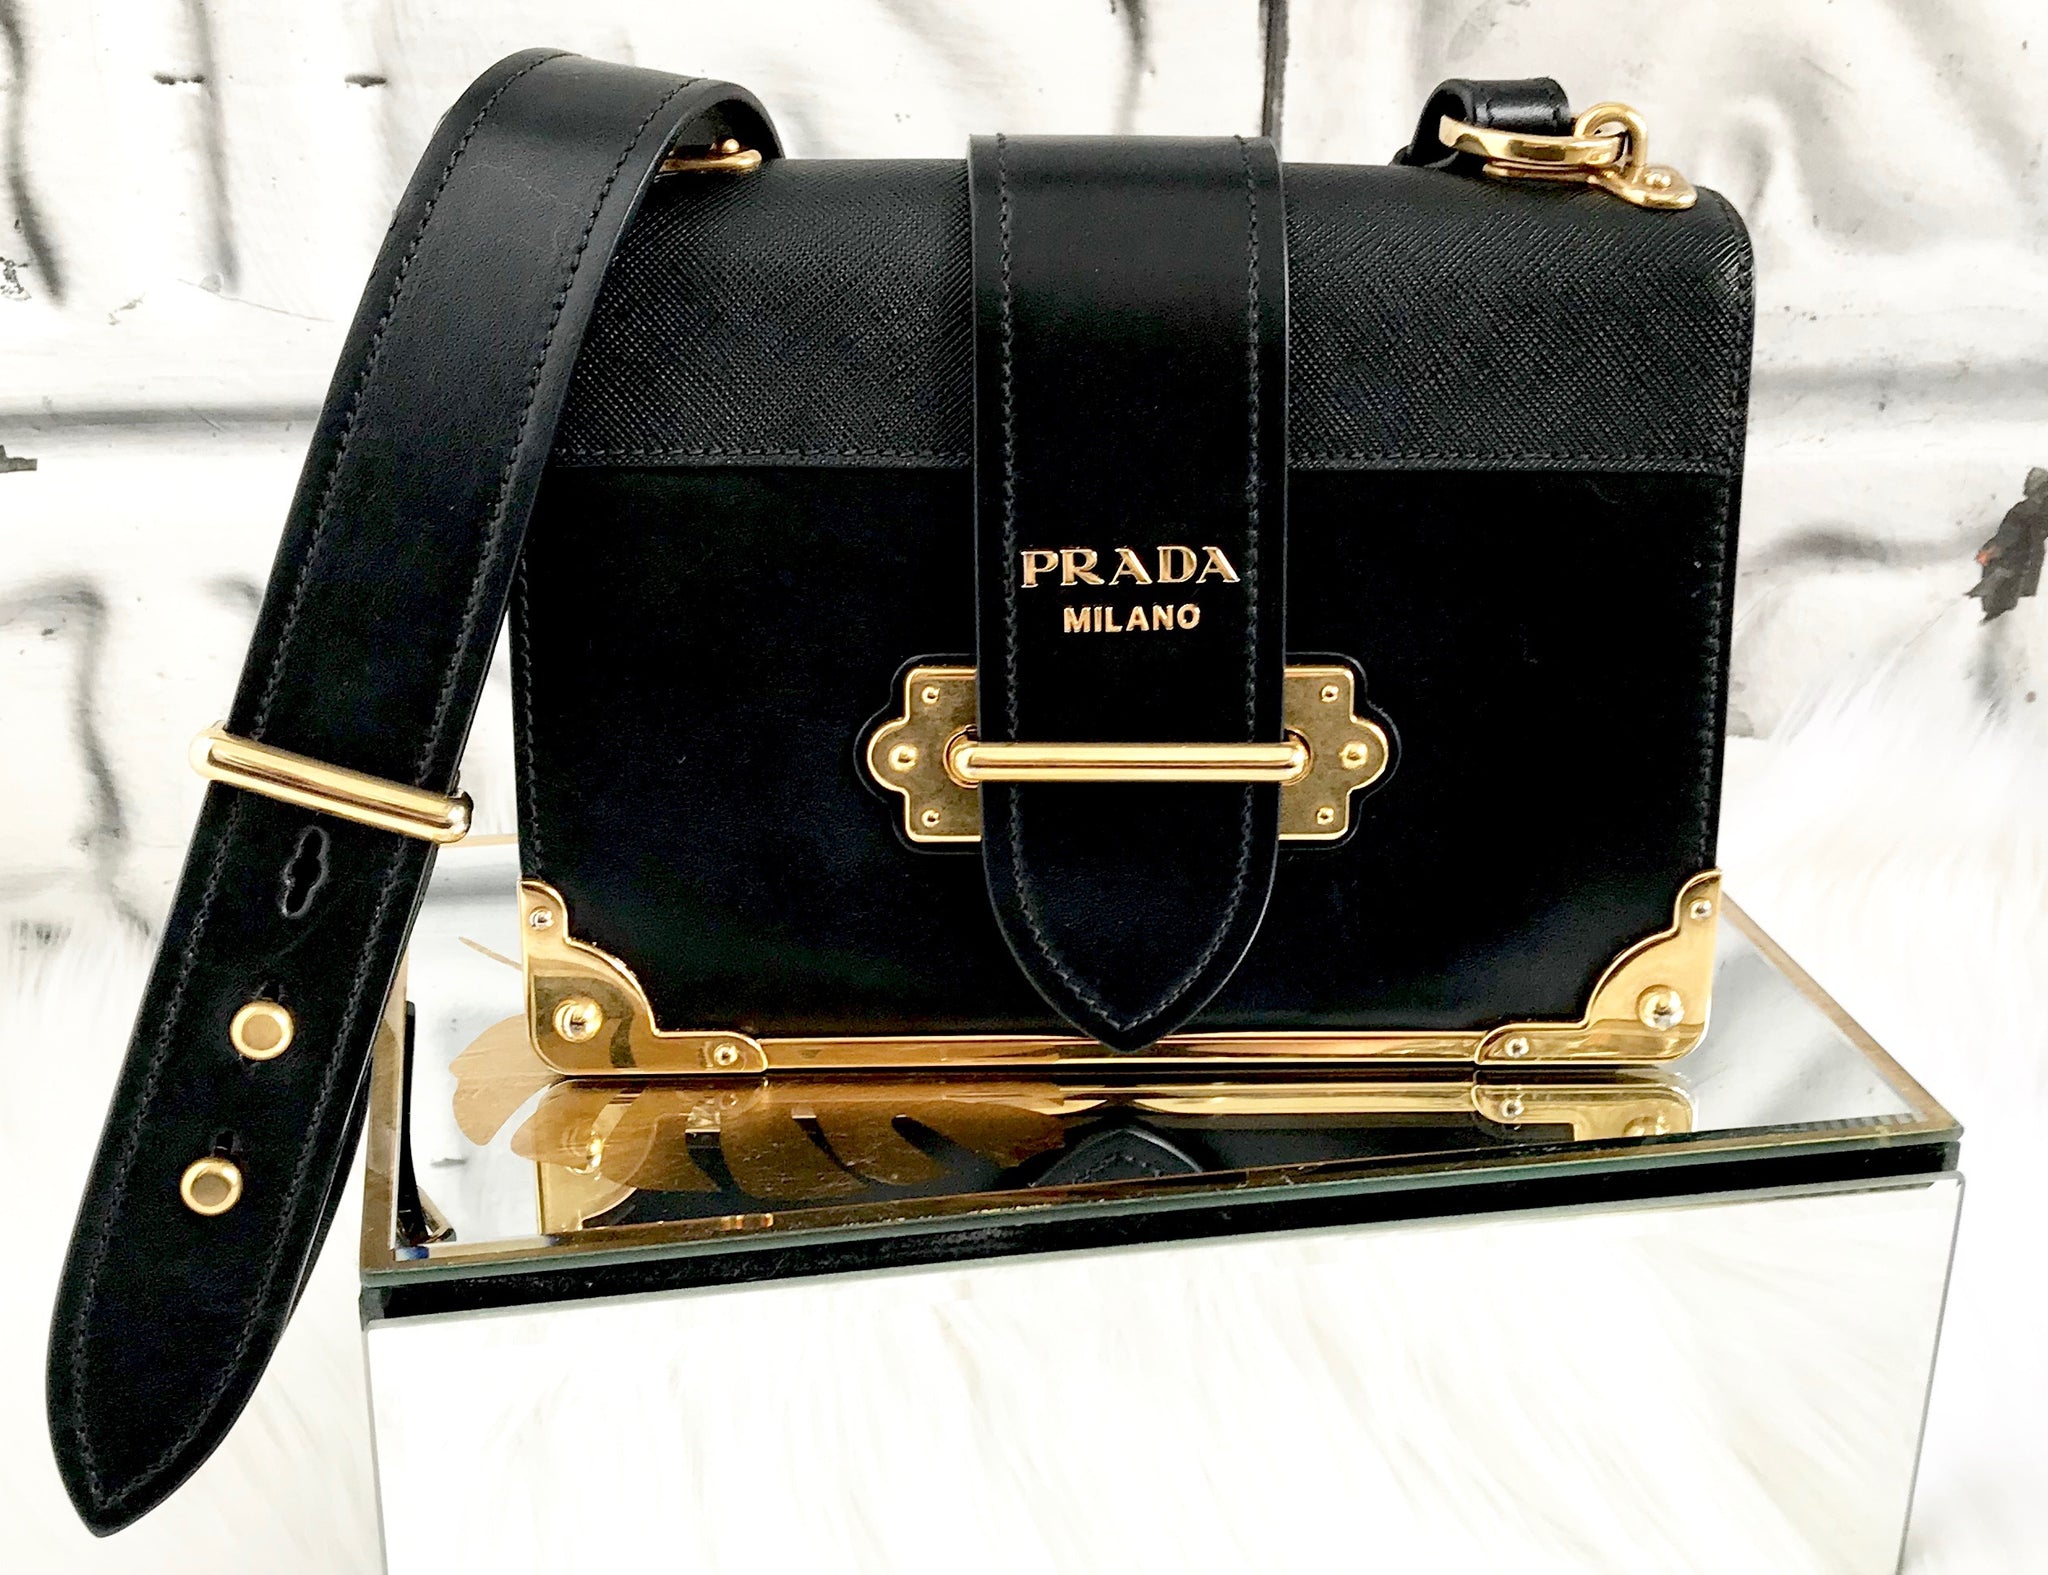 Cahier leather clutch bag Prada Black in Leather - 37245238